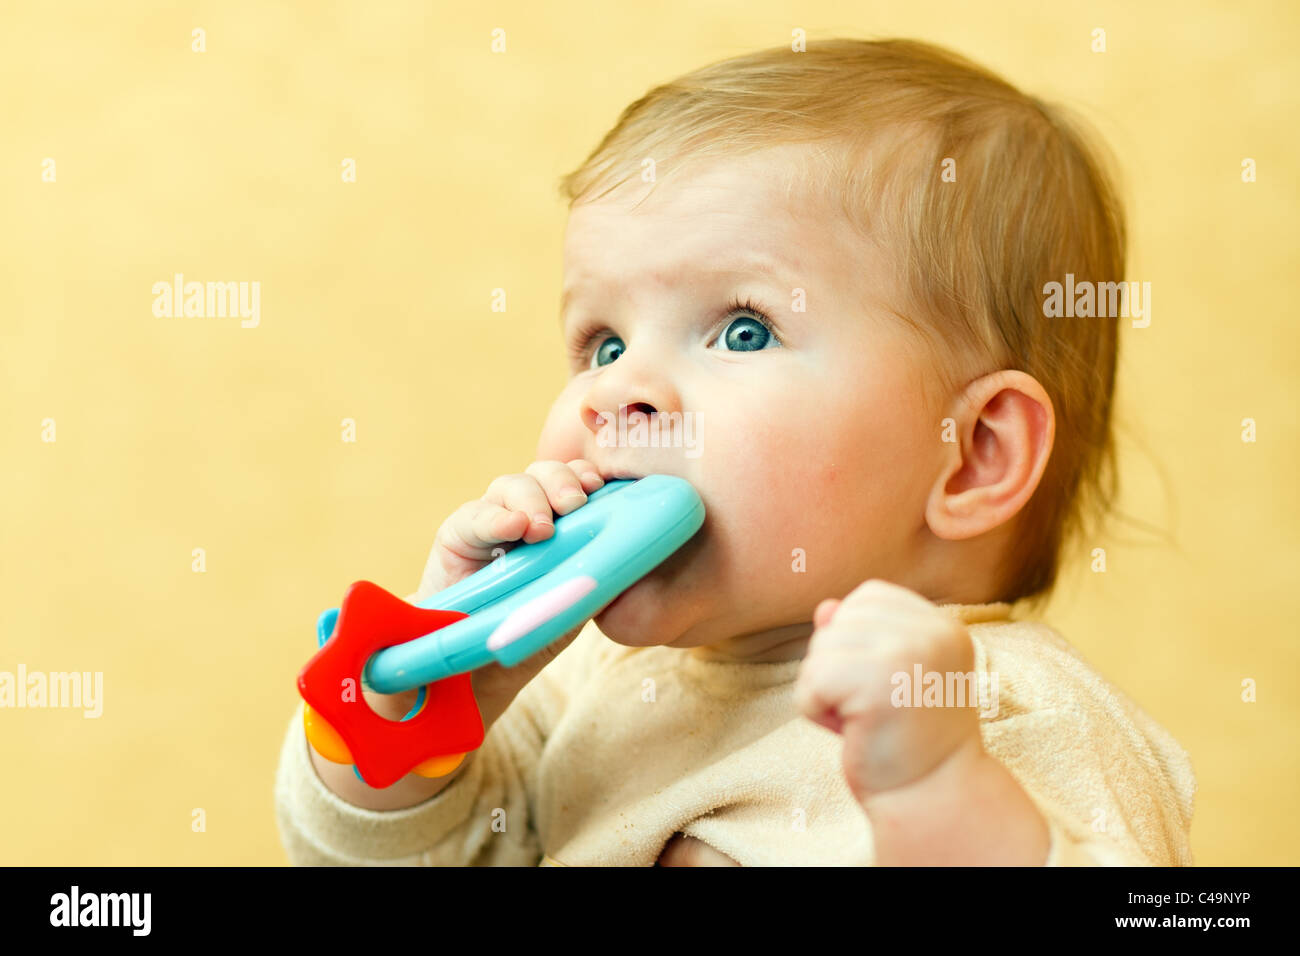 Small baby with a toy. Stock Photo